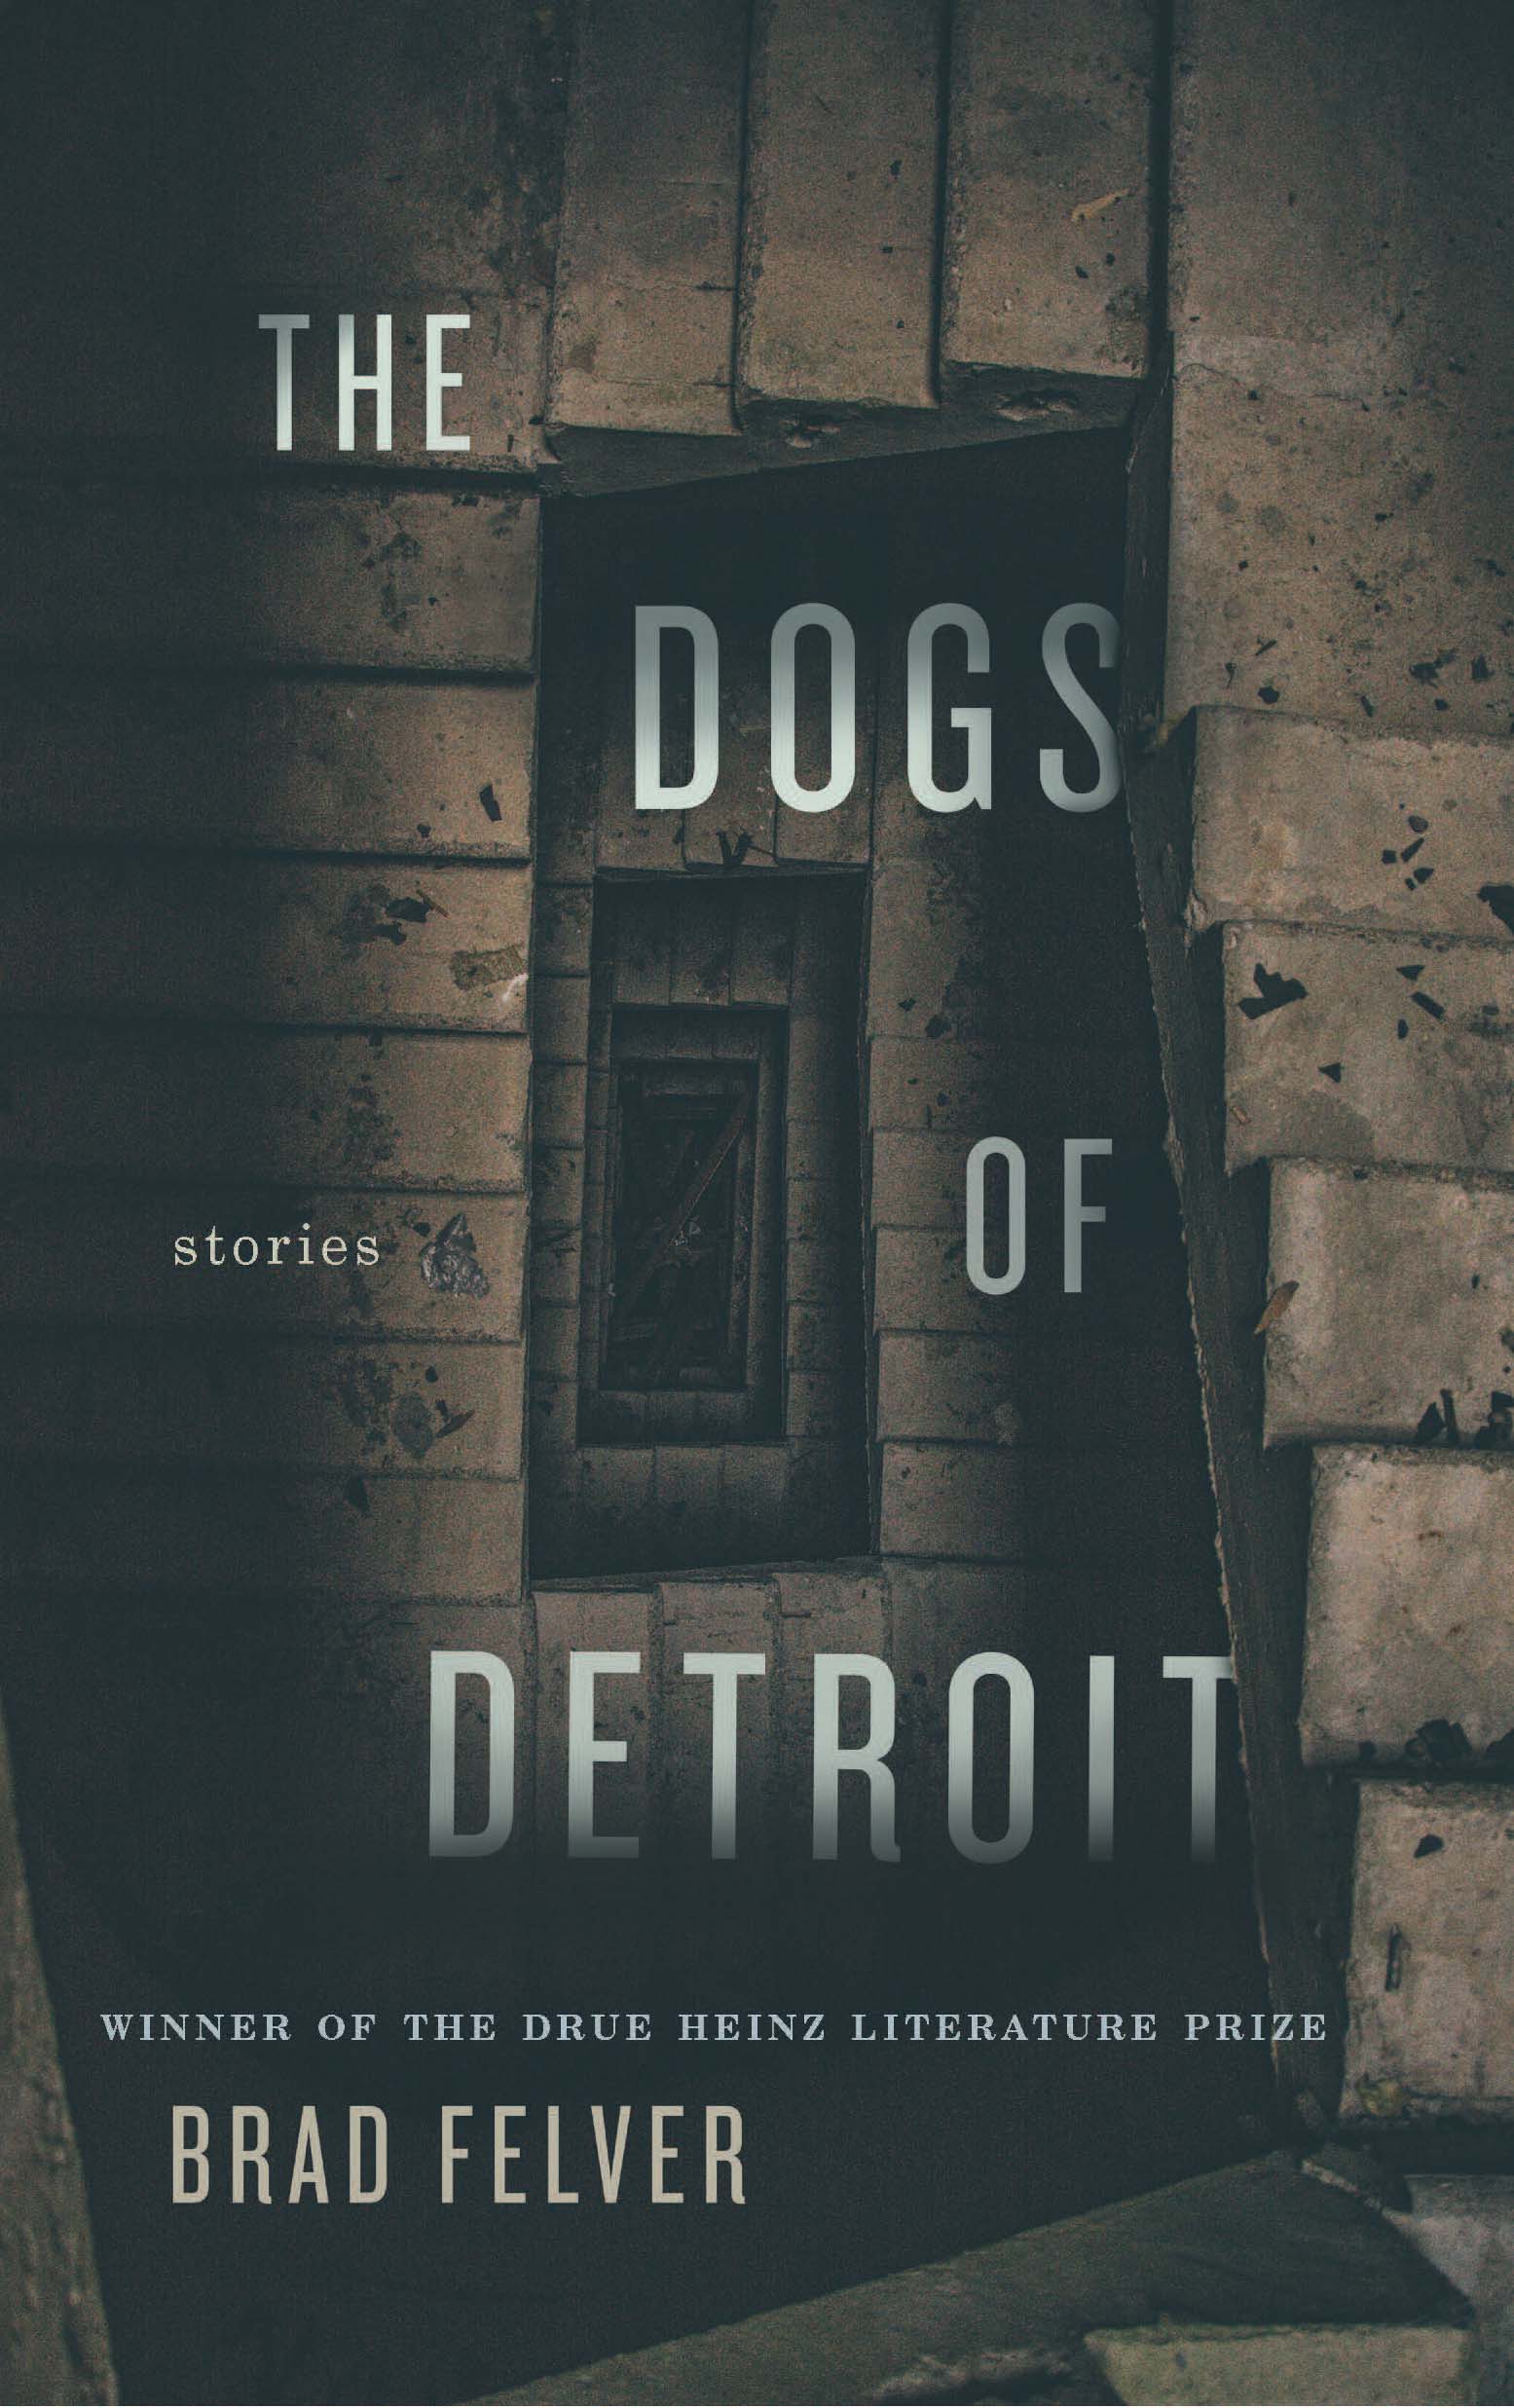 "The Dogs of Detroit"